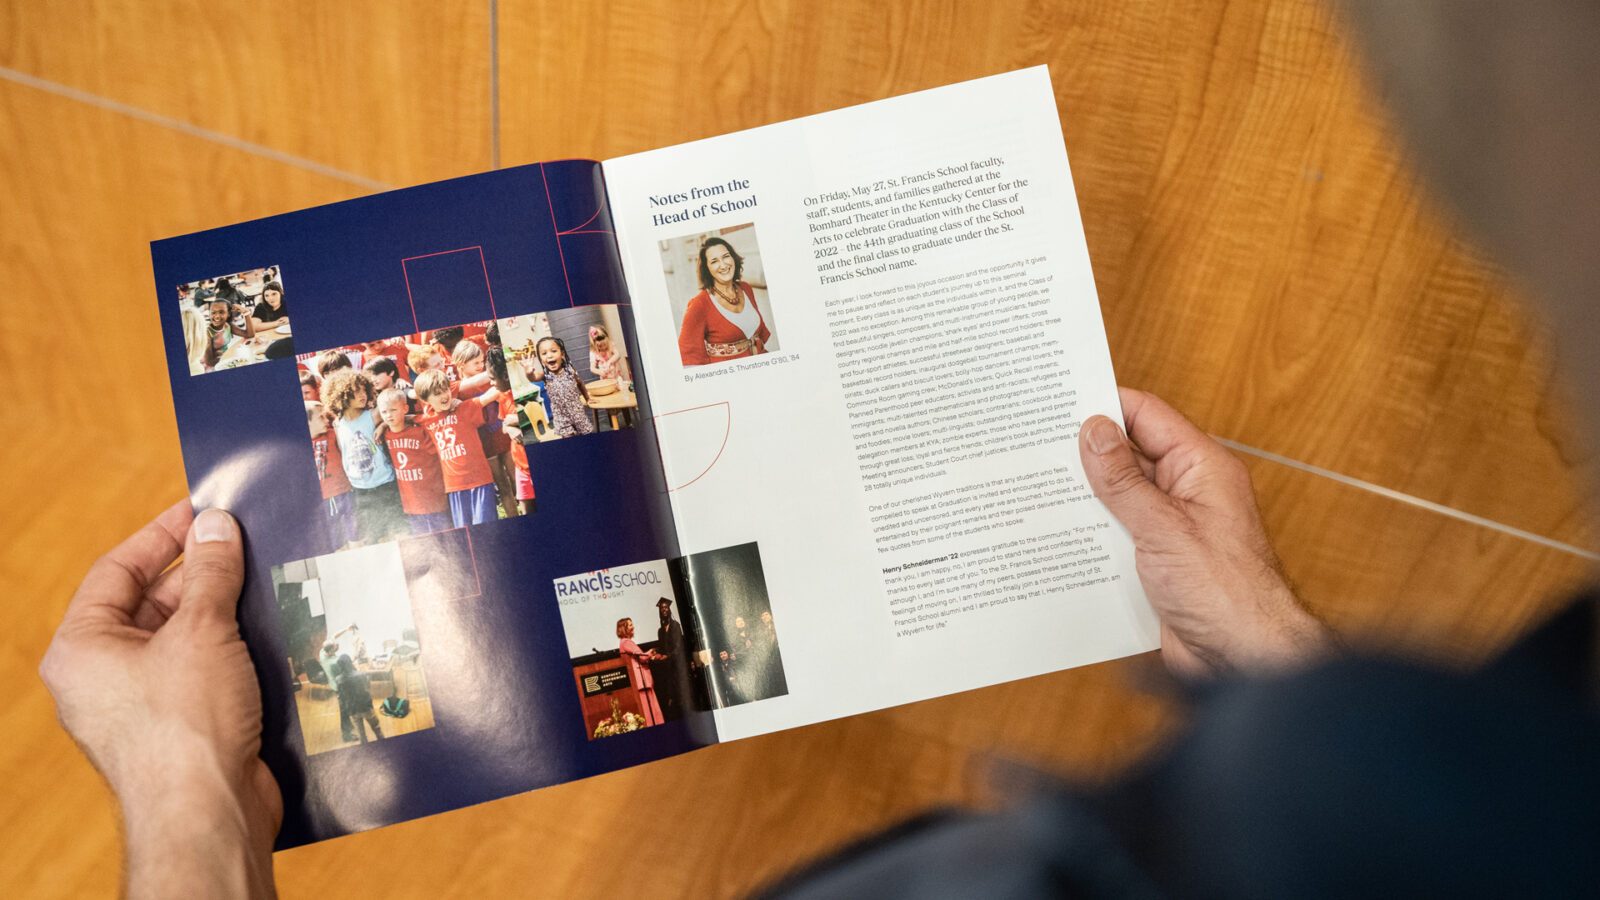 Francis Parker School, Education Branding, Annual Report and Photography by Natosha Via